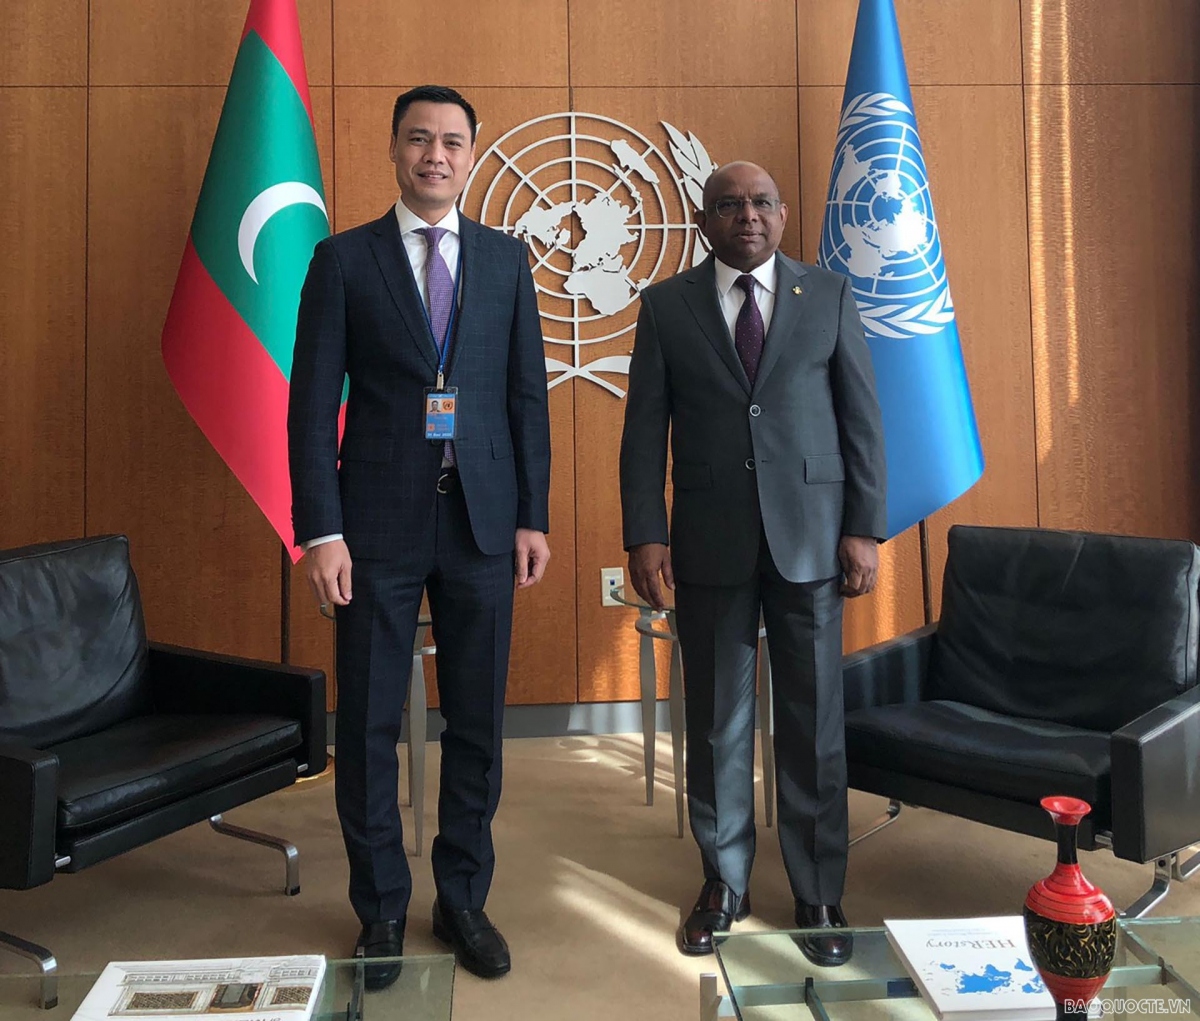 Ambassador Dang Hoang Giang (L) pays a courtesy visit to UNGA President Abdulla Shahid in New York on March 3. (Photo: baoquocte.vn)